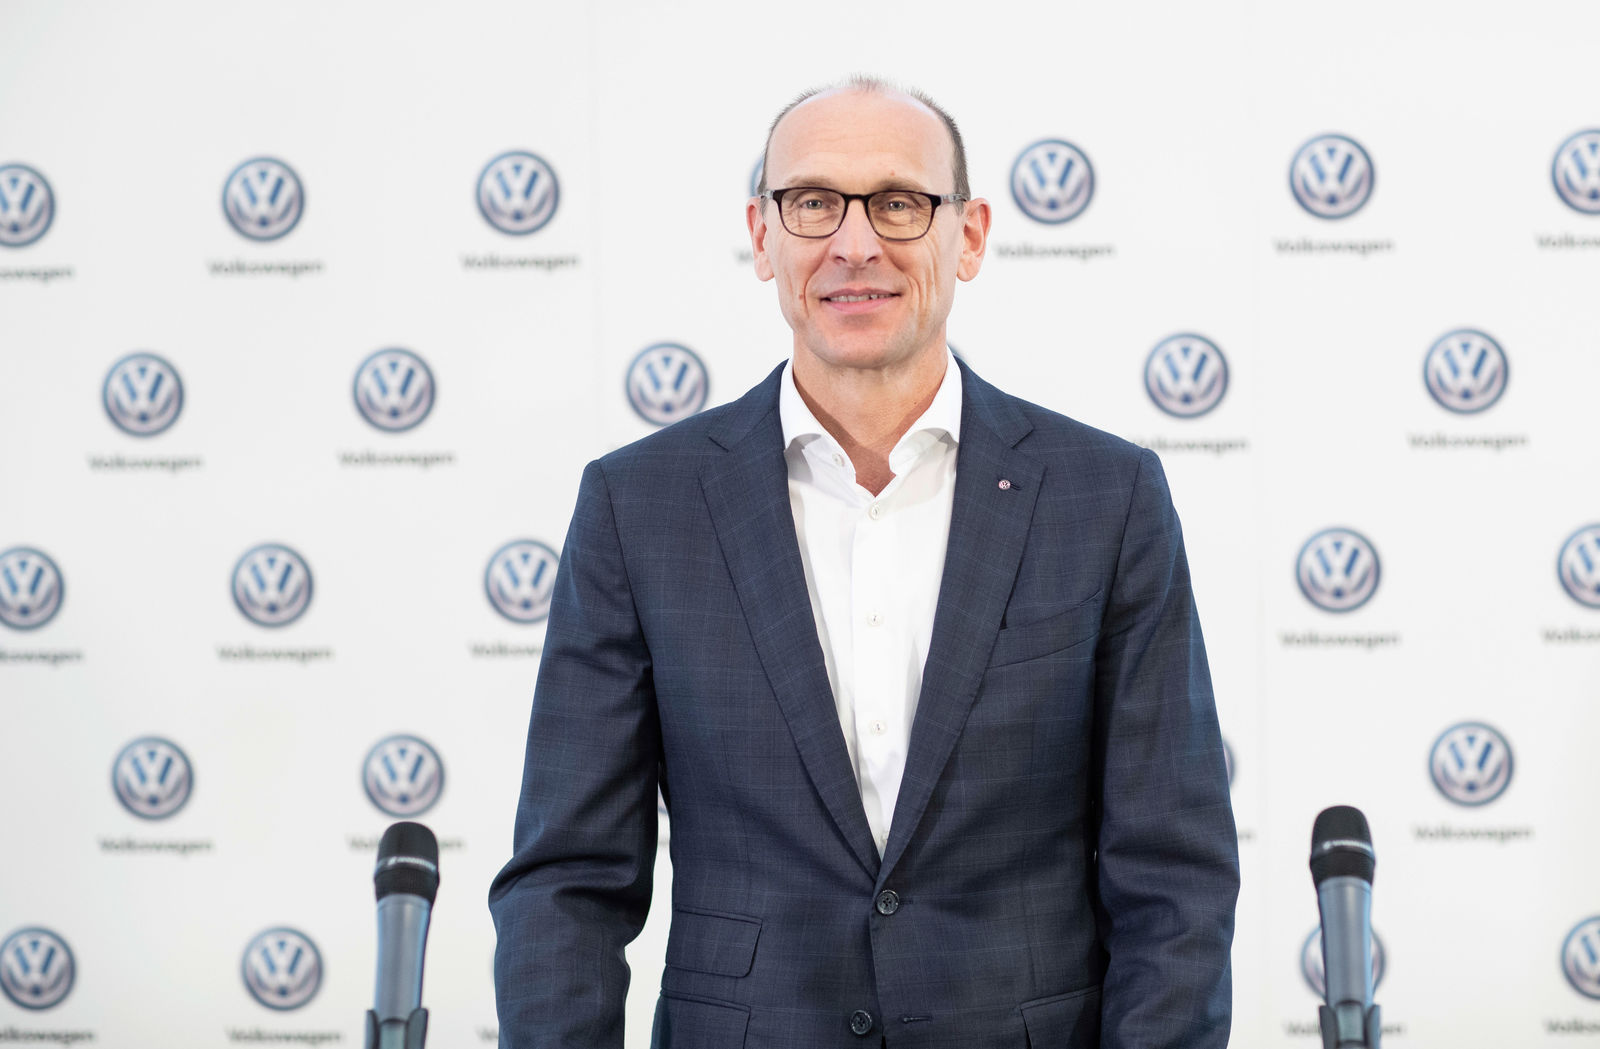 Volkswagen agrees digital transformation roadmap for administration and production